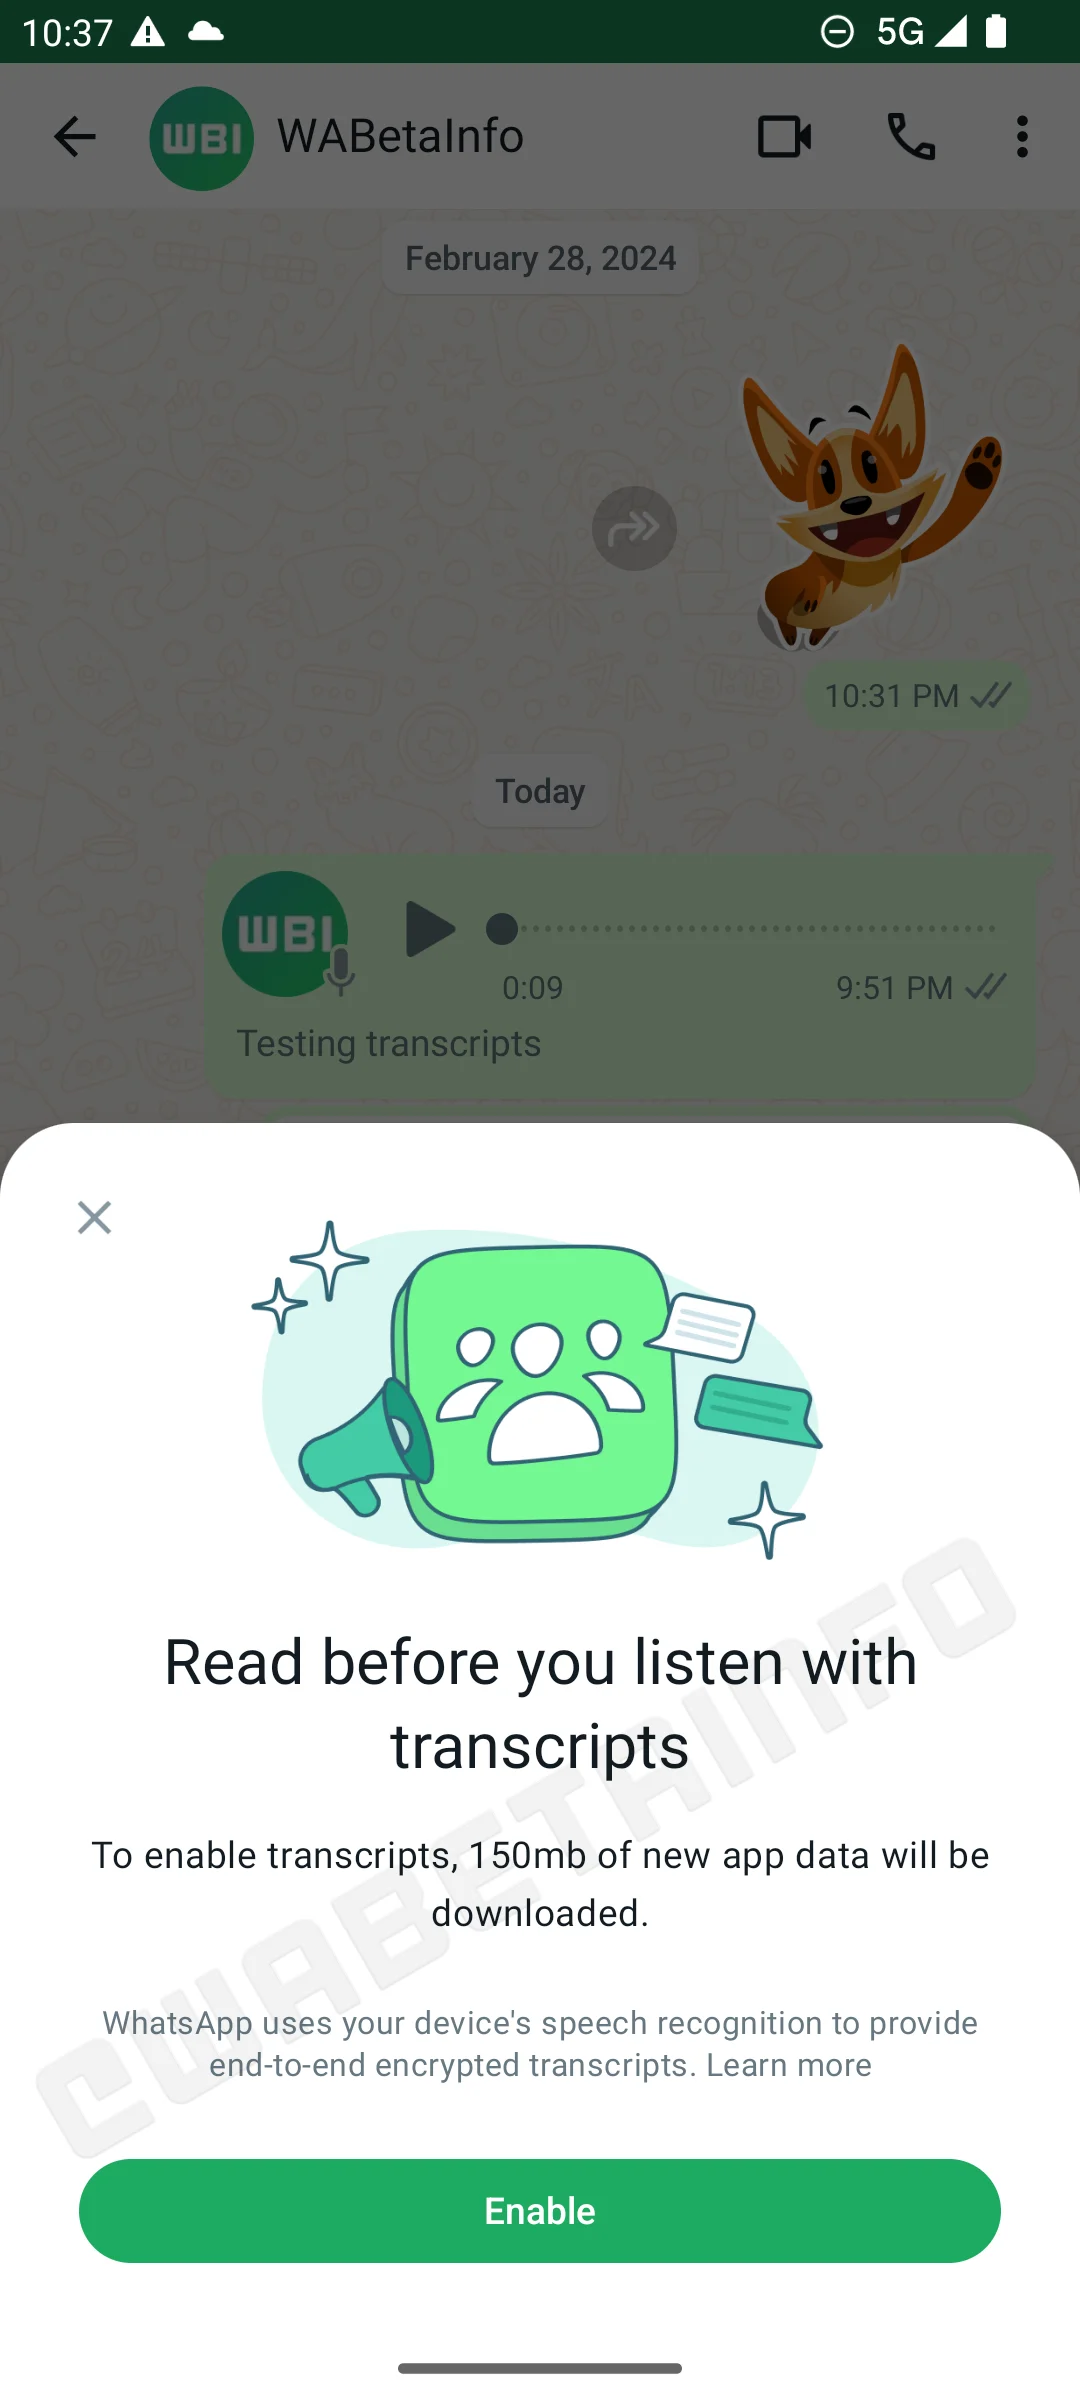 WhatsApp Will Soon Allow You To Turn Voice Messages Into Text